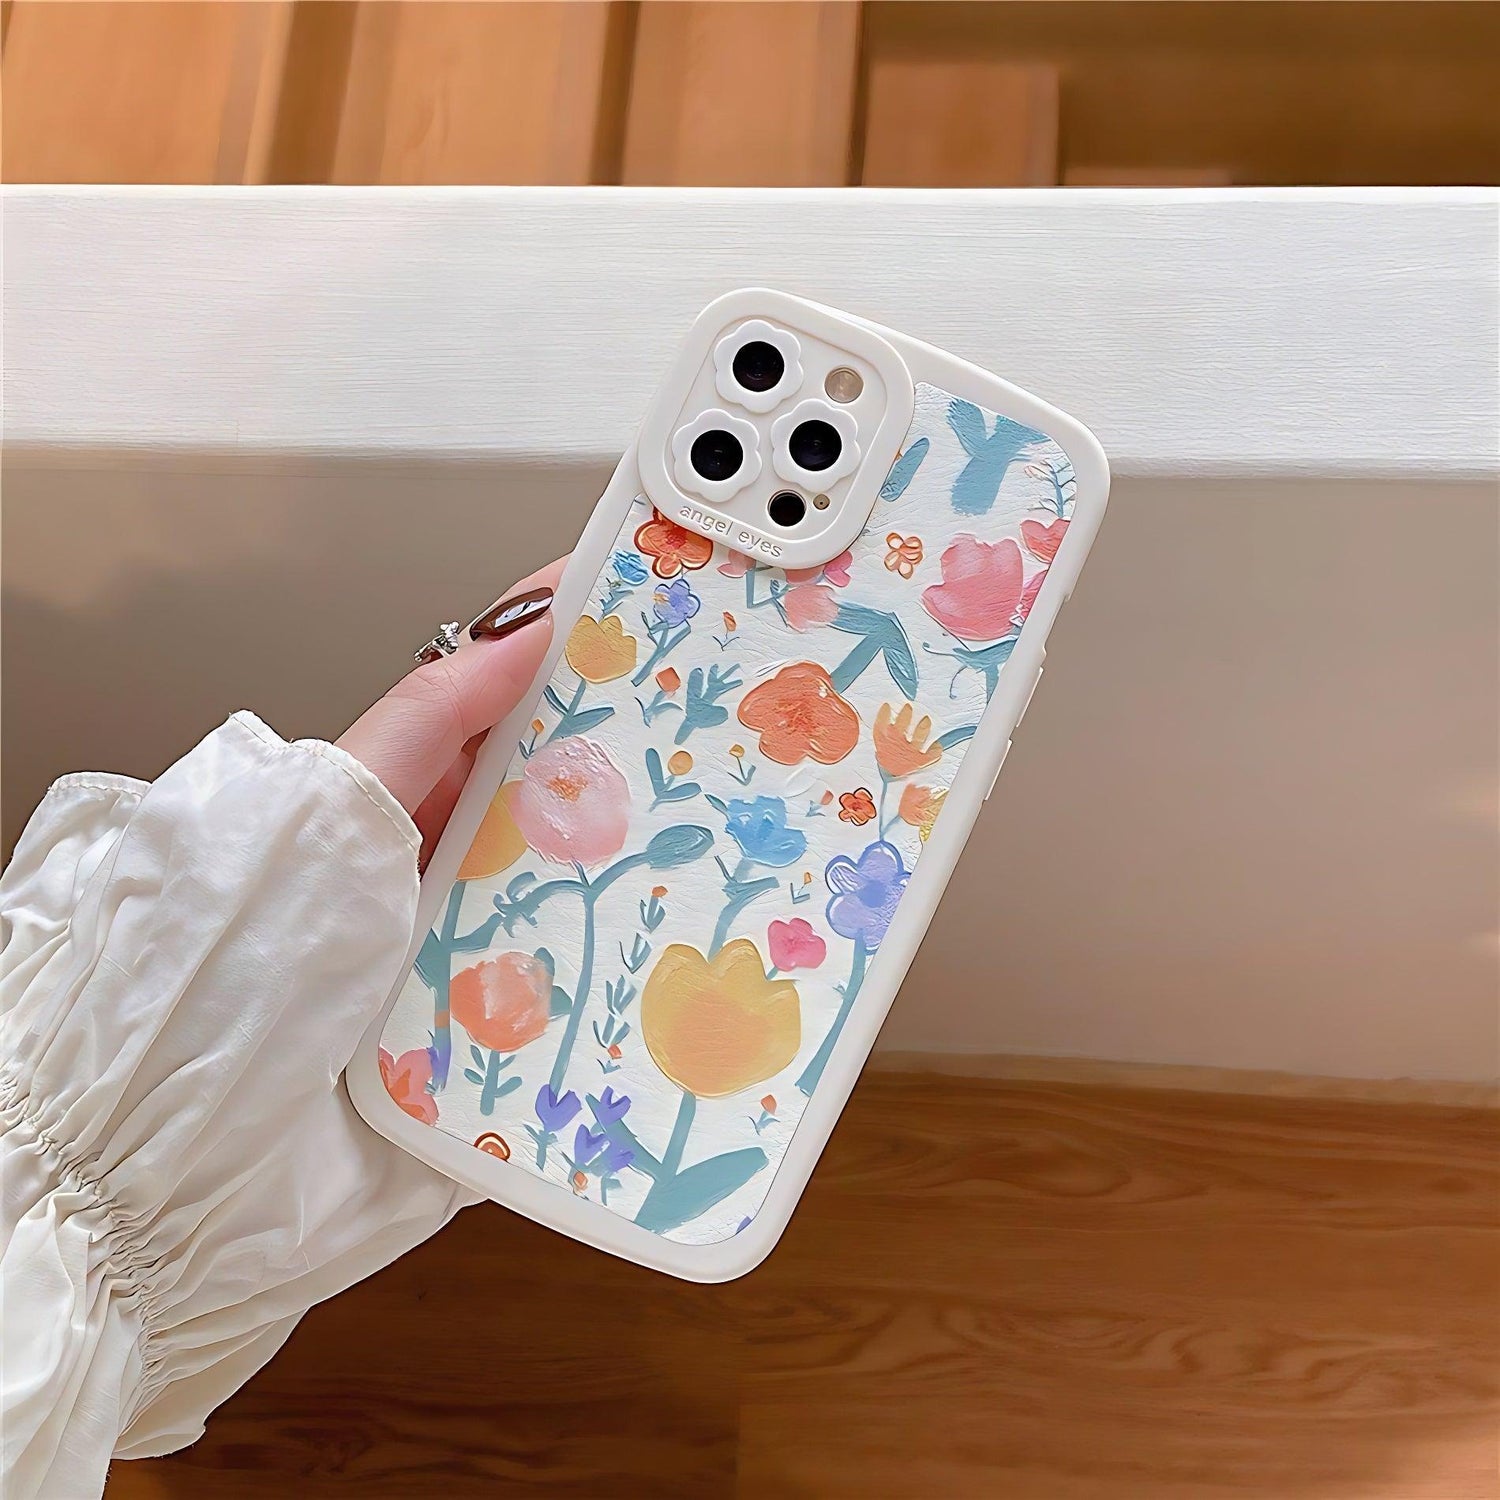 Phone Cases That Protect and Express - Touchy Style .